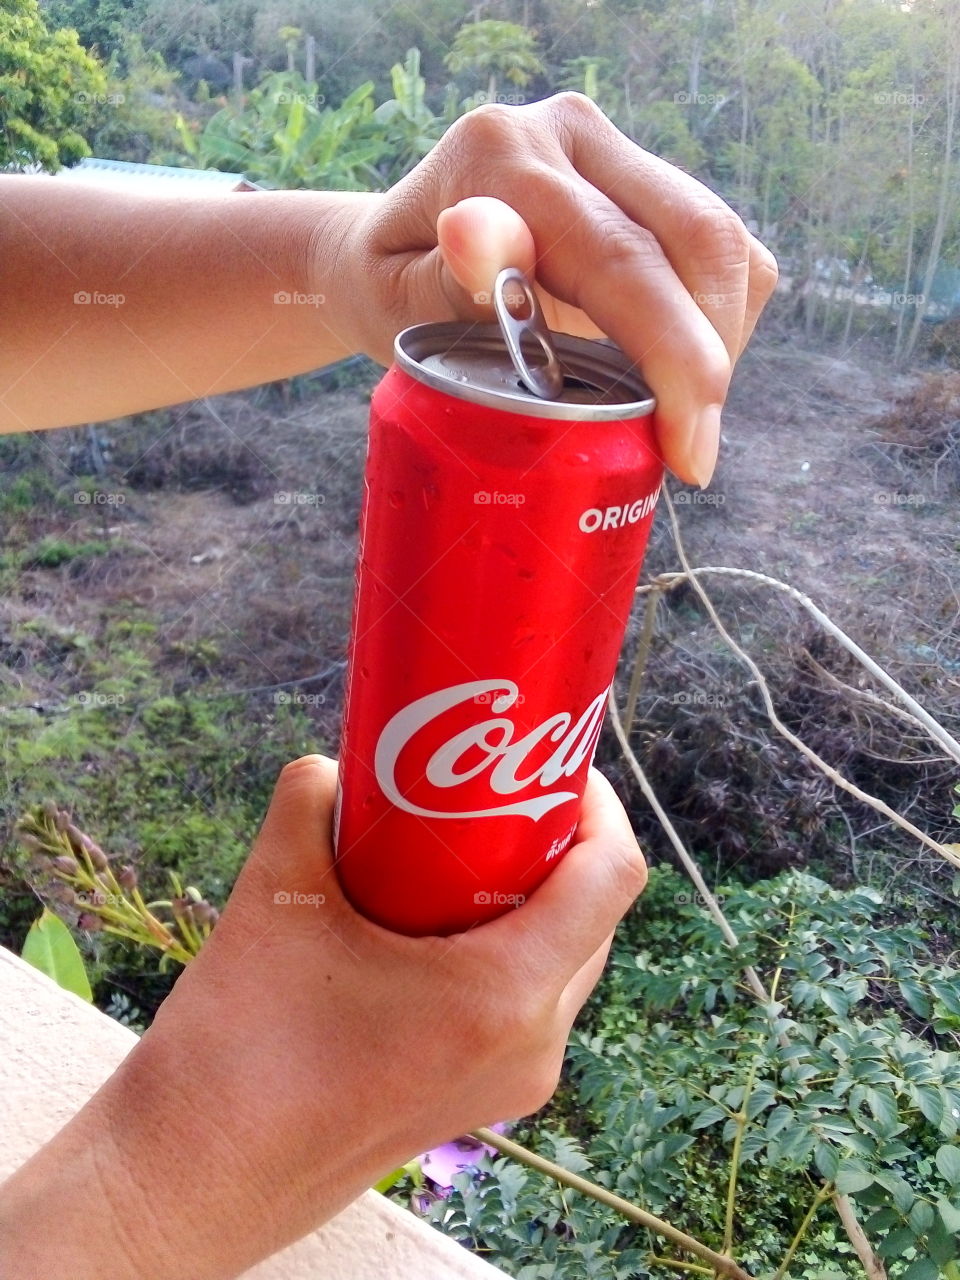 Quench your thirst with Coca-Cola.